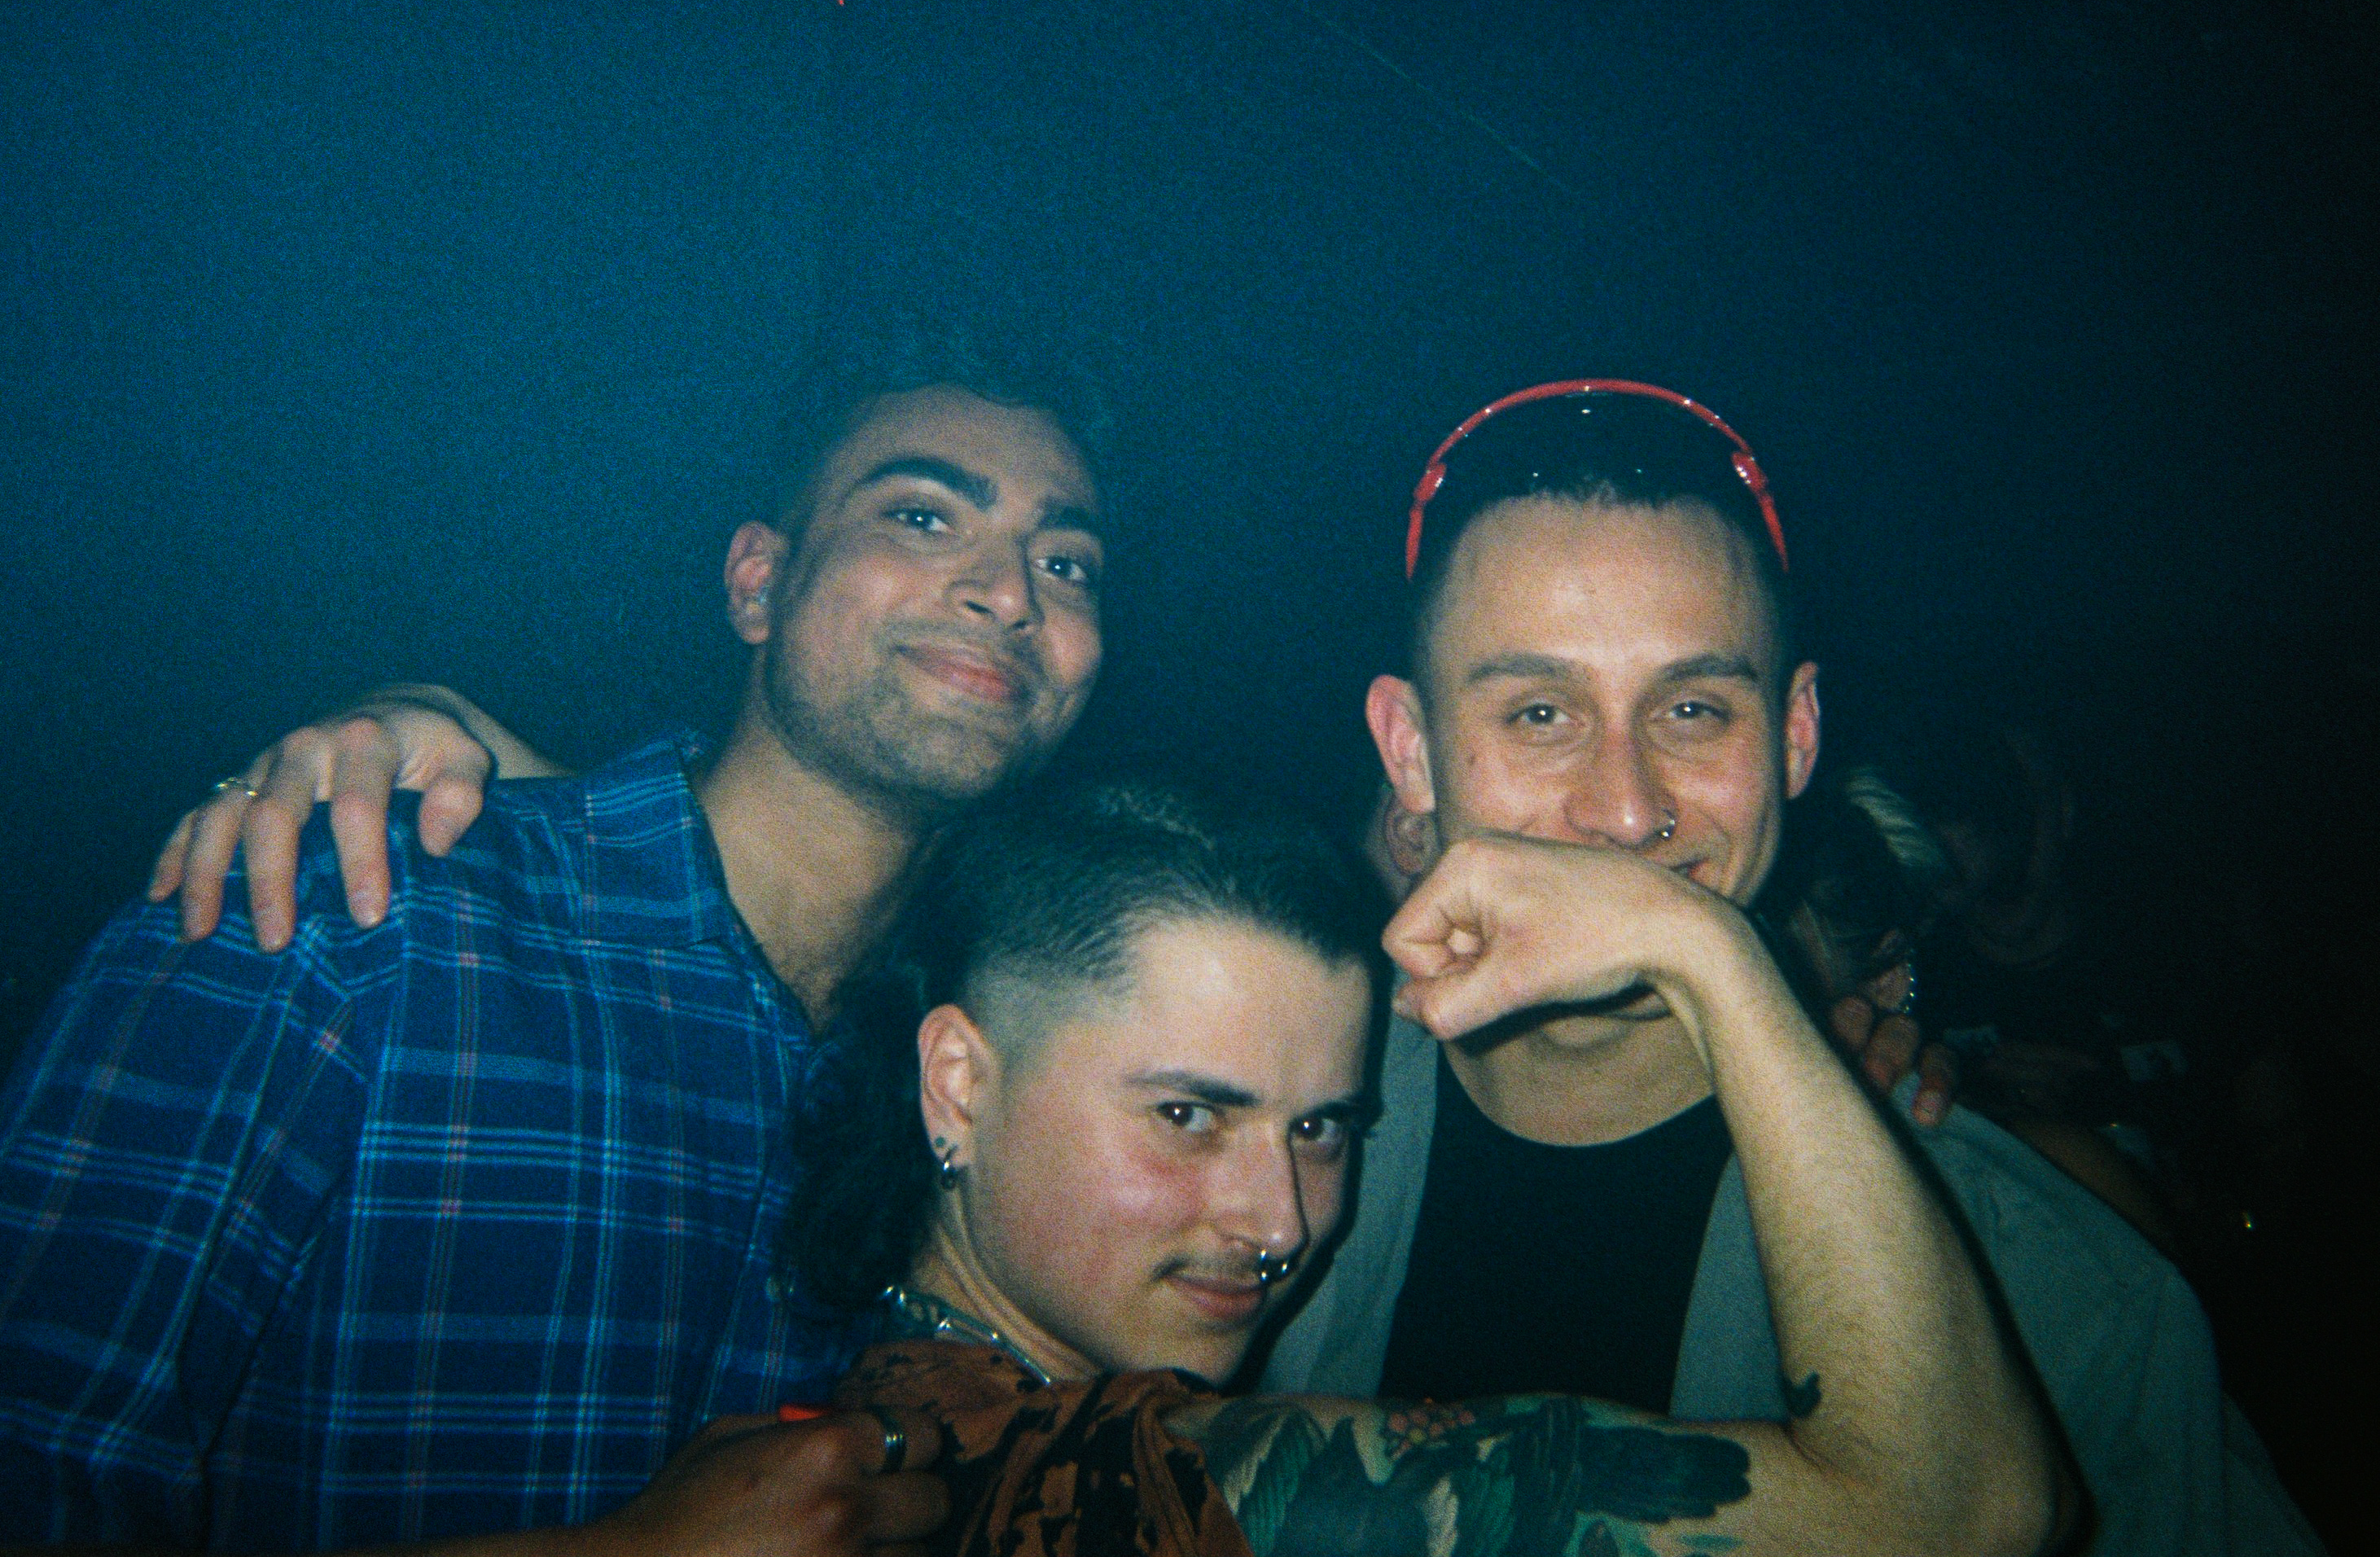 three people pose for a photo in a nightclub